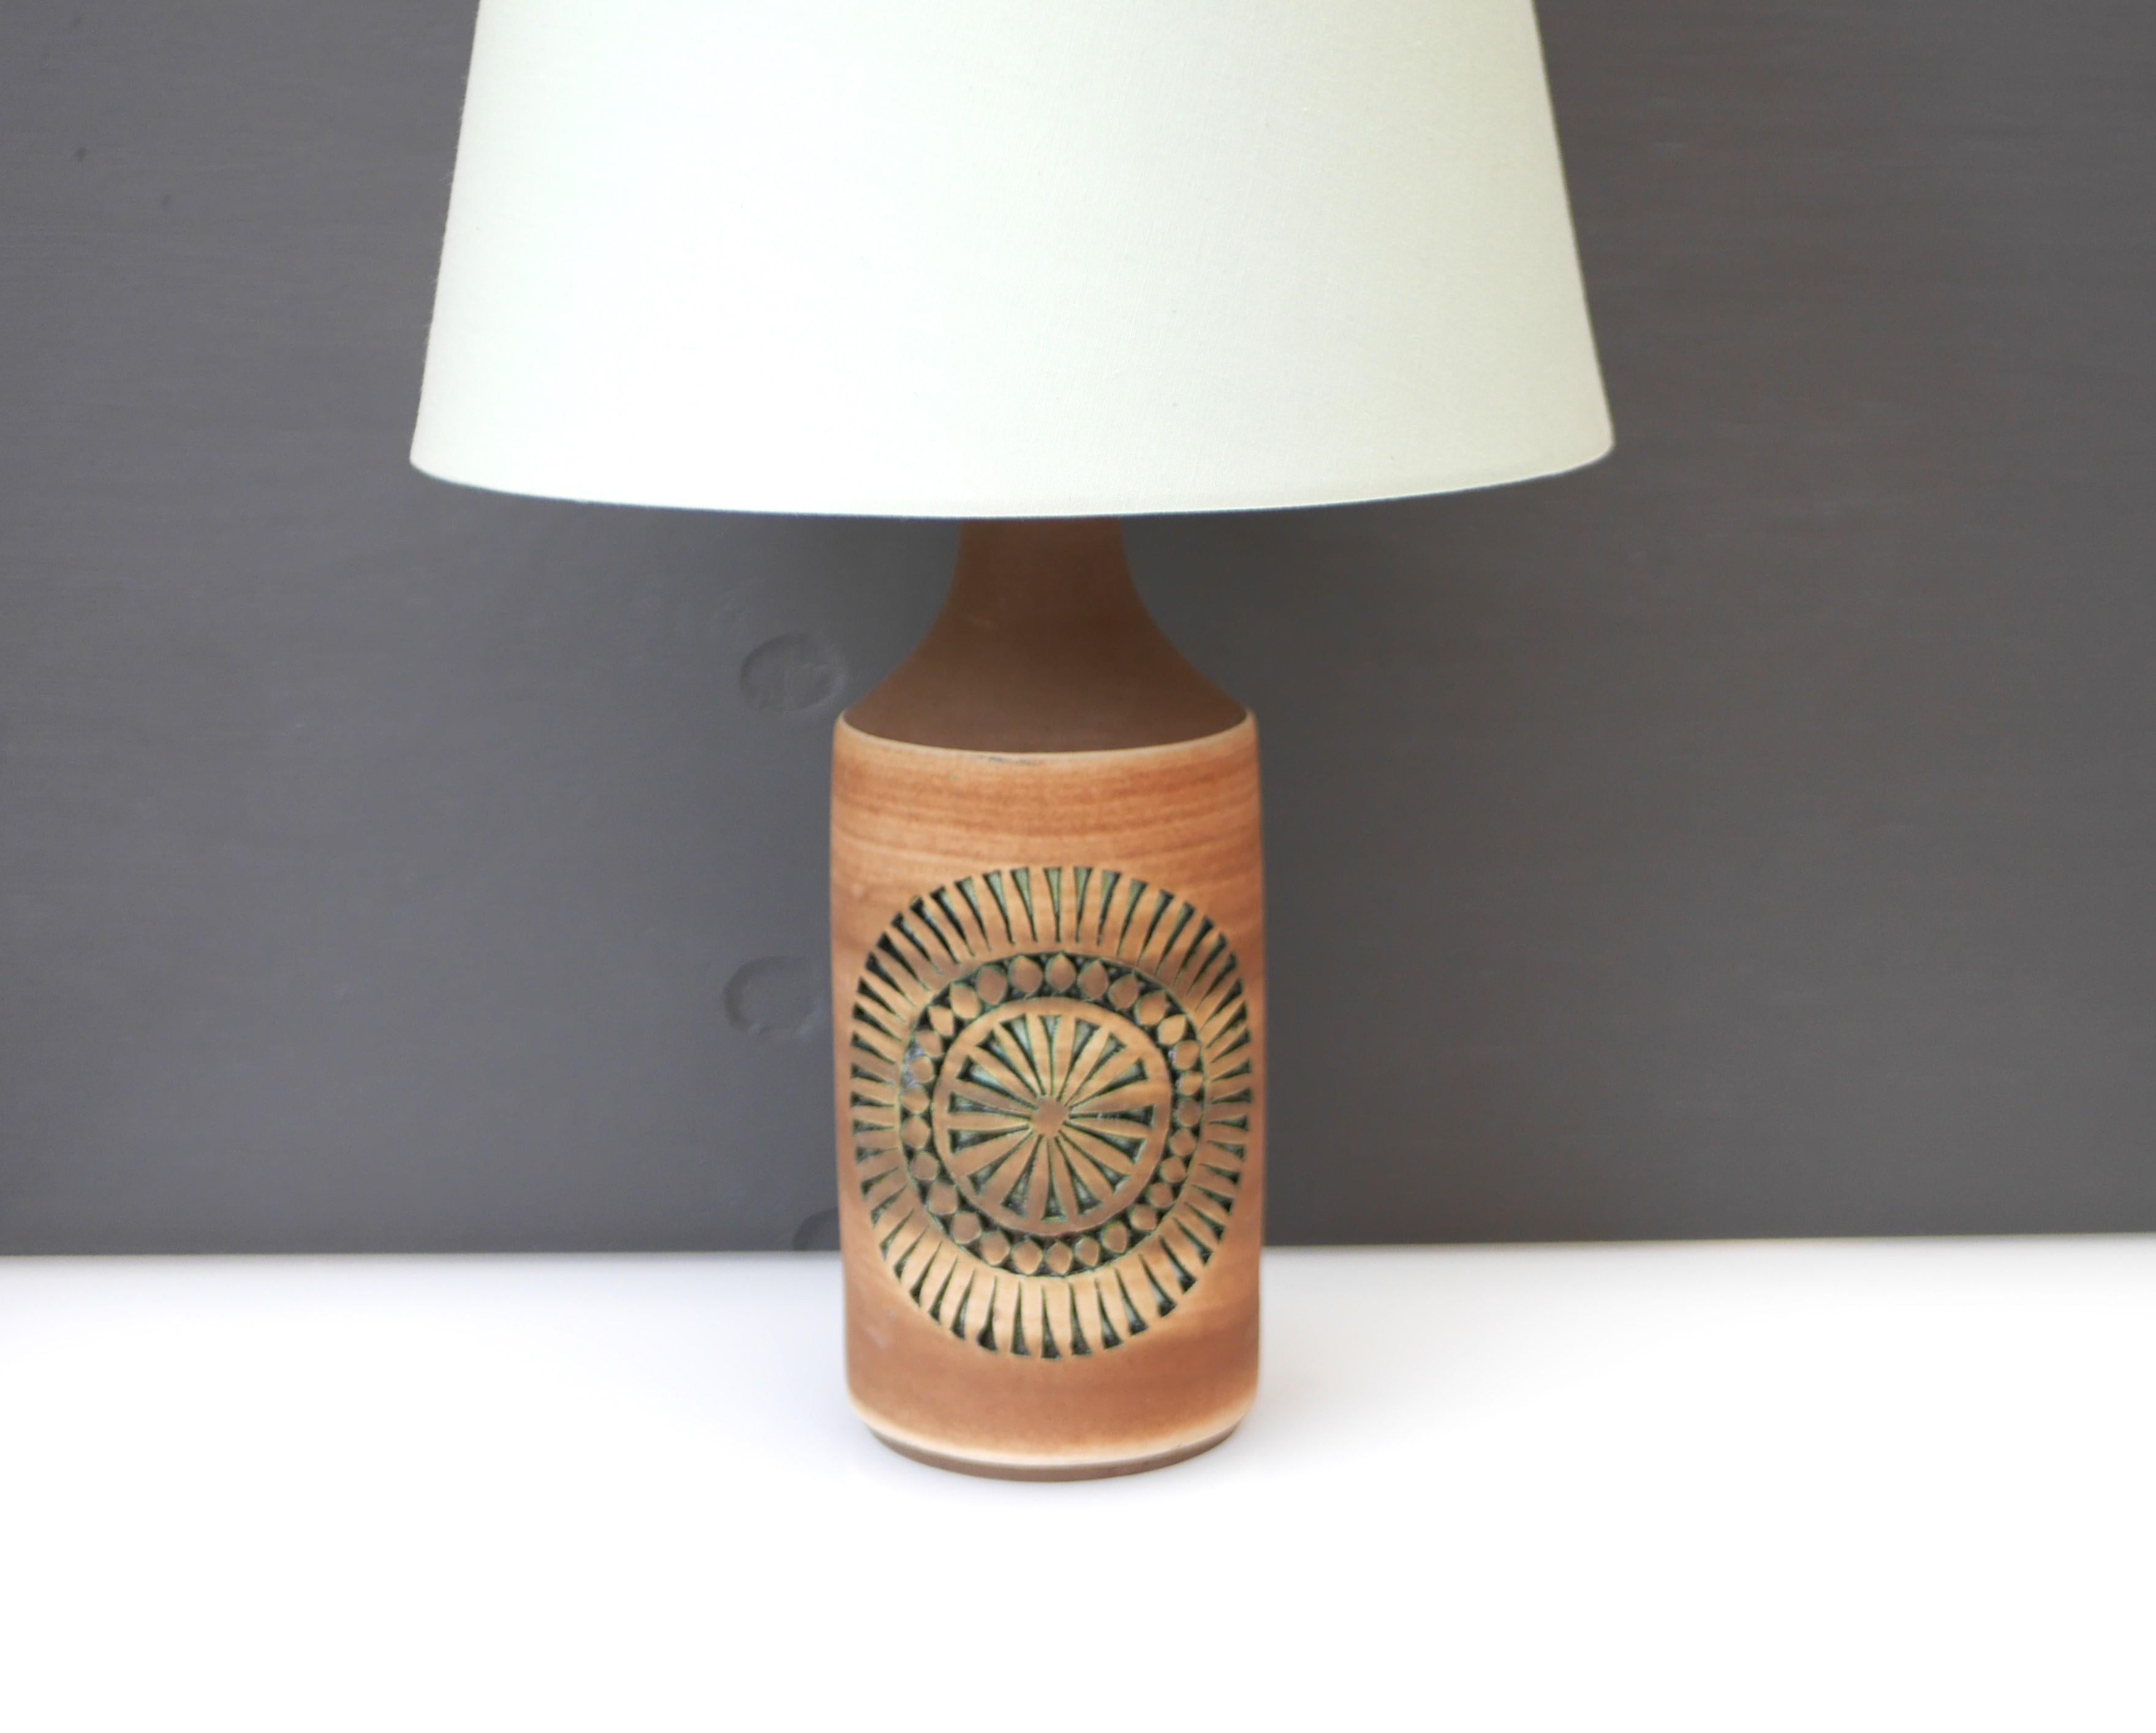 A fantastic rather large vintage ceramic lamp base, handmade by Thomas Anagrius for Alingsås Keramik, Sweden. This lamp base is simple in the design, with intricate patterns imbedded and it is all handmade. The patterns are simple, yet it is the